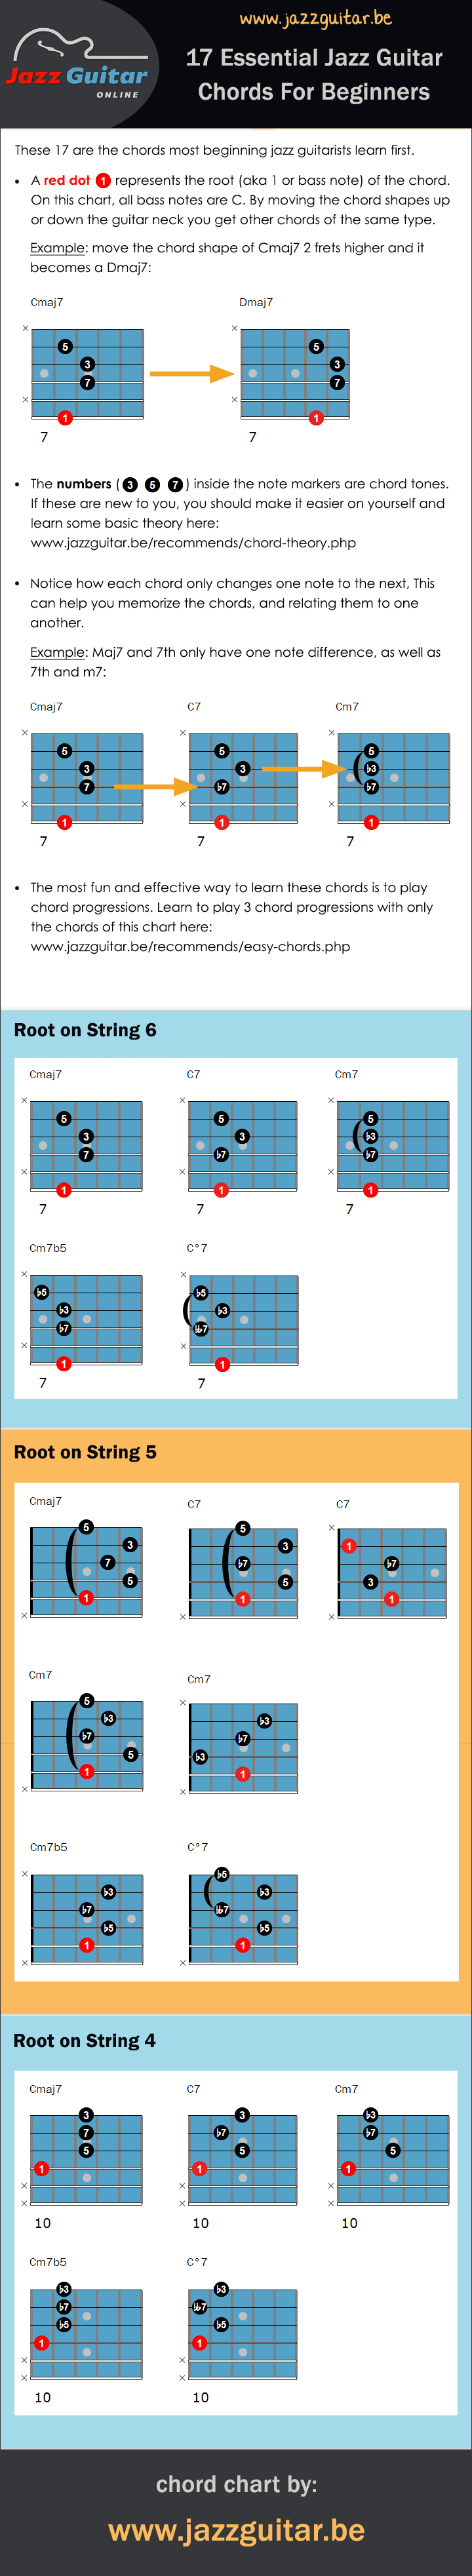 Night Moves Chords Top 17 Easy Jazz Guitar Chords For Beginners Chord Chart